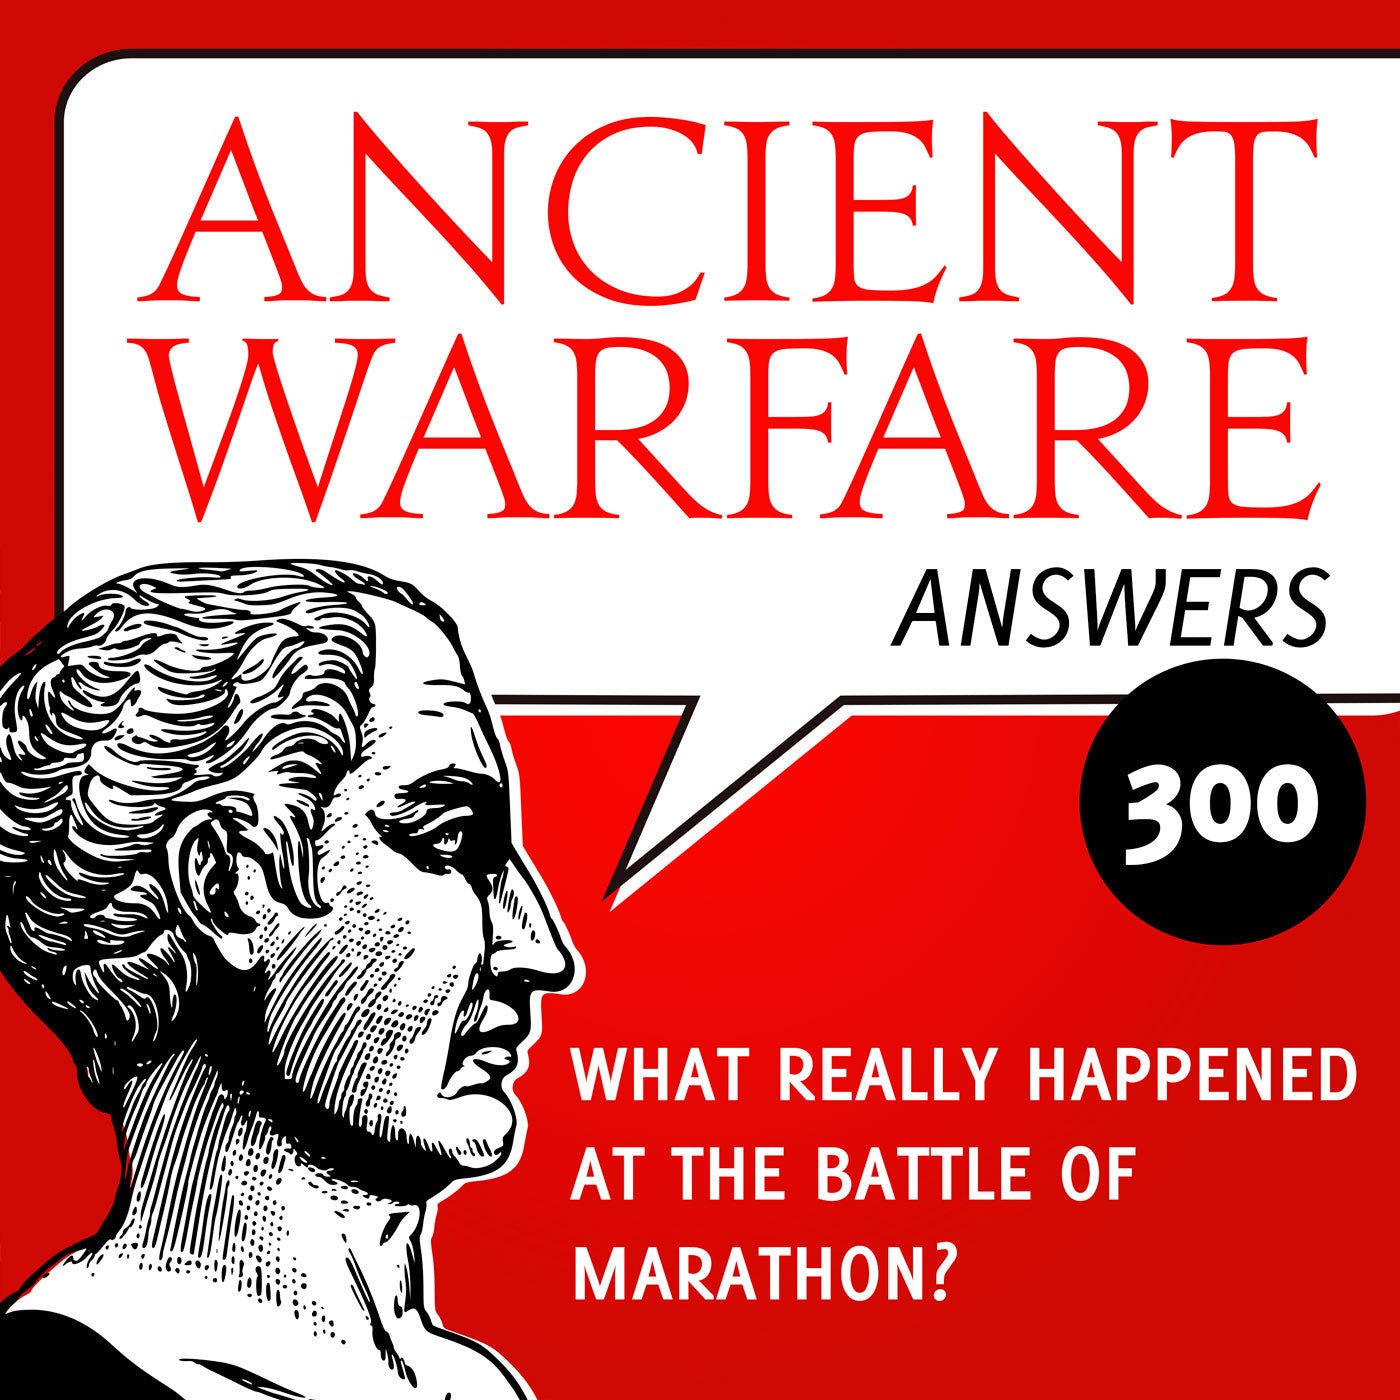 Ancient Warfare Answers (300): What really happened at the battle of Marathon